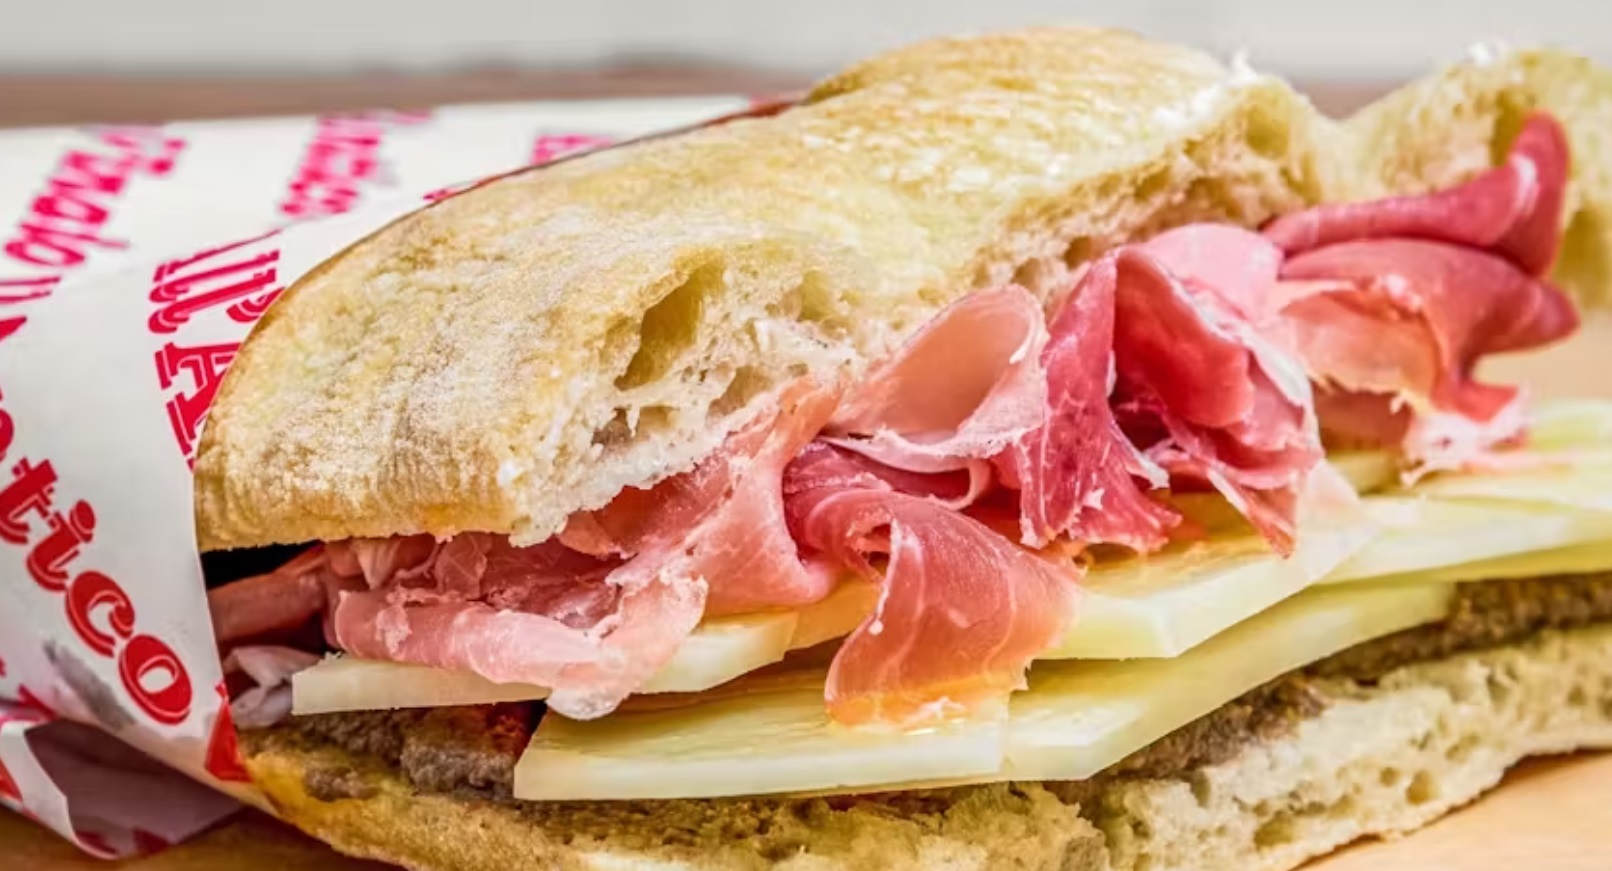 All'antico Vinaio is giving out 1,000 free sandwiches tomorrow